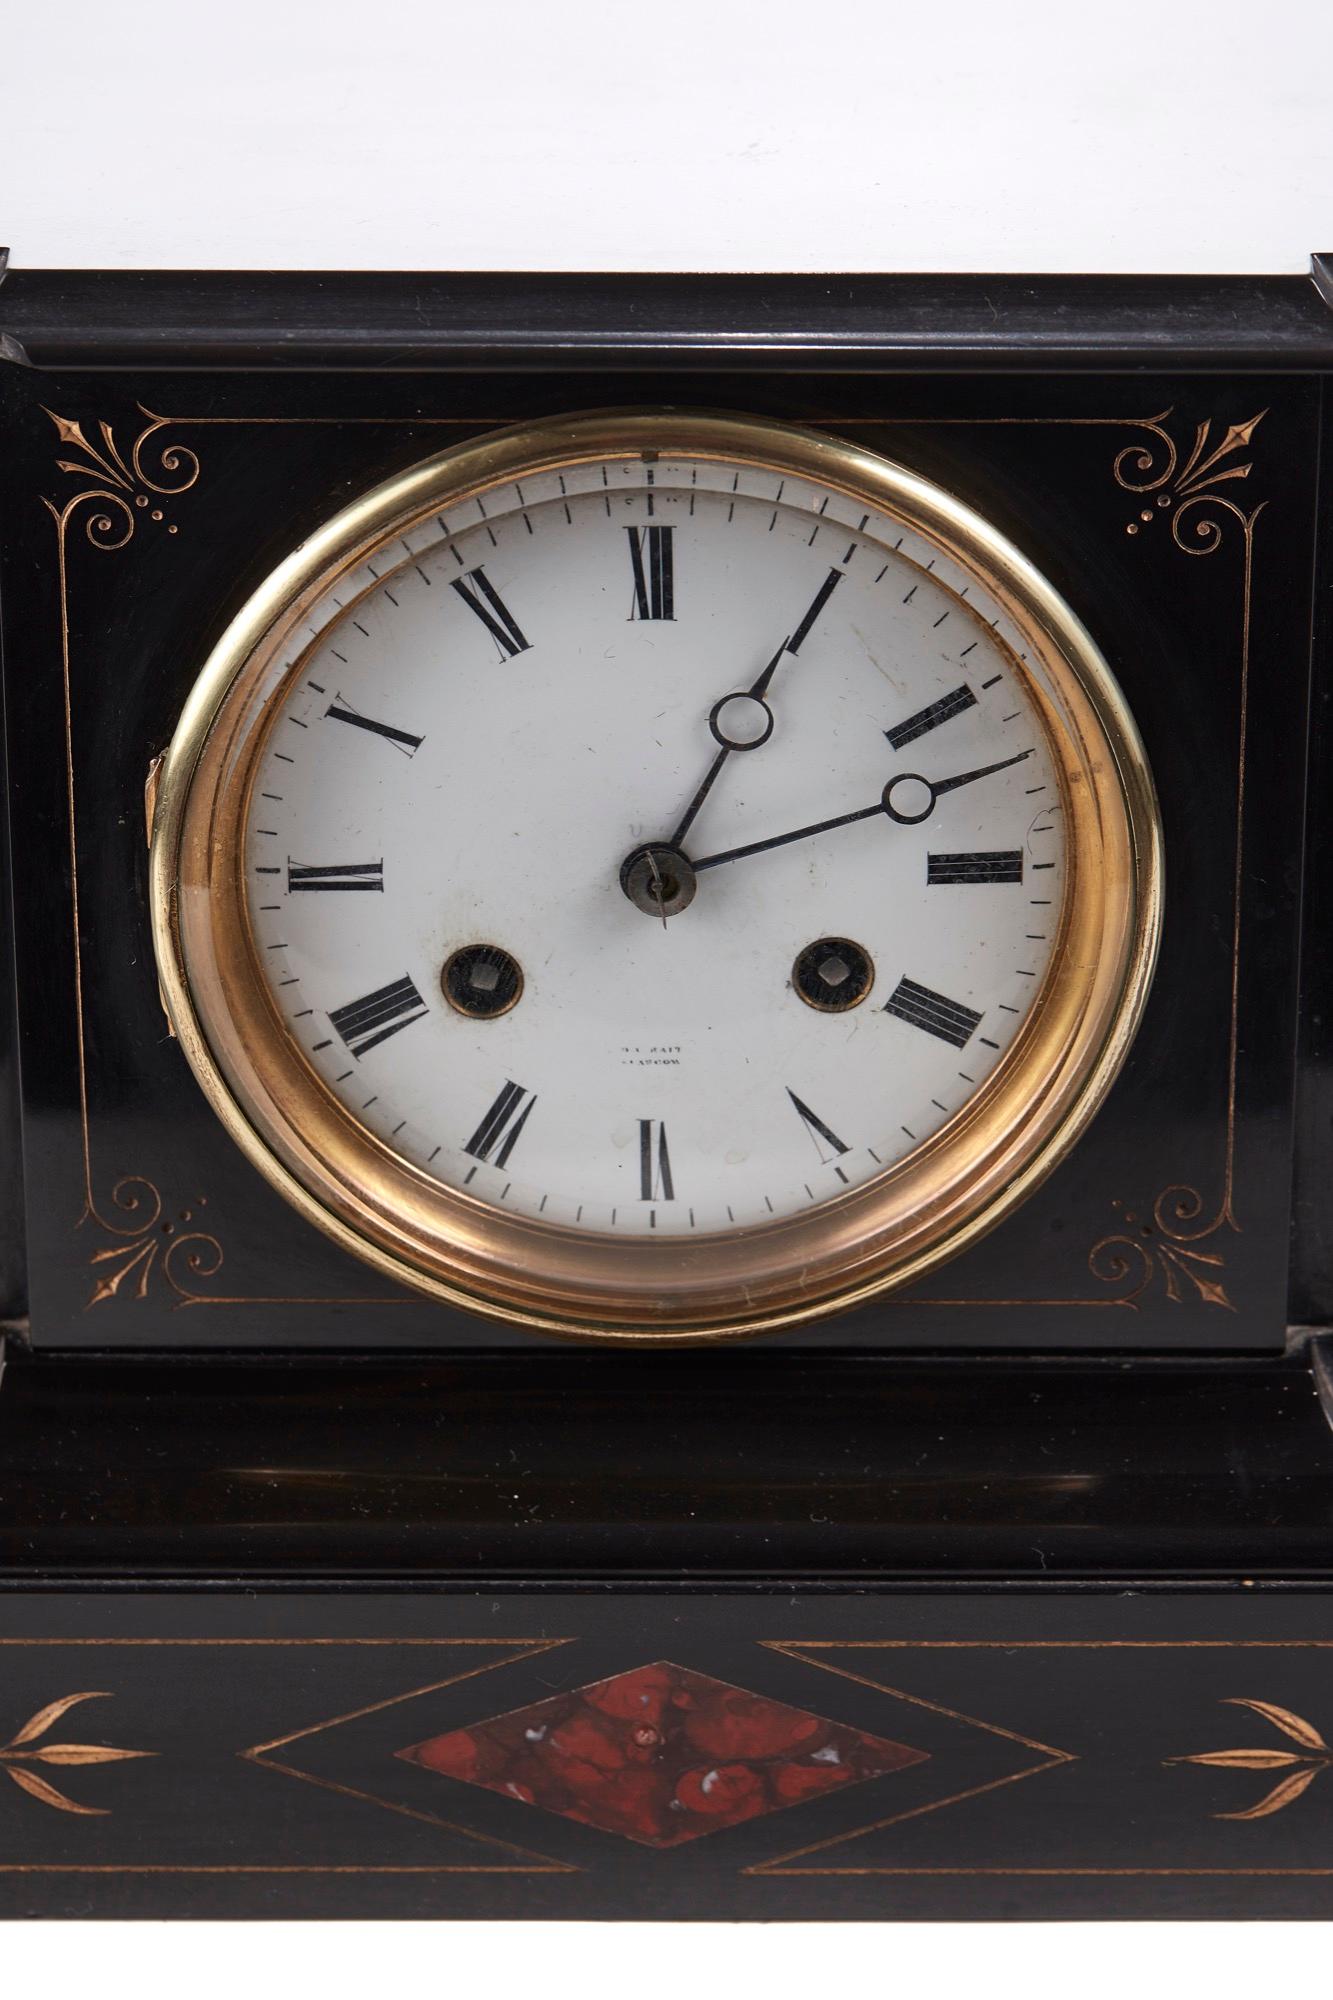 Victorian slate and rouge marble architectural mantel (fireplace) clock. The substantial case inset with rouge marble panels enclosing the 10cm enameled dial painted with Roman numerals and indistinctly signed 'Glasgow', the clock with a two train